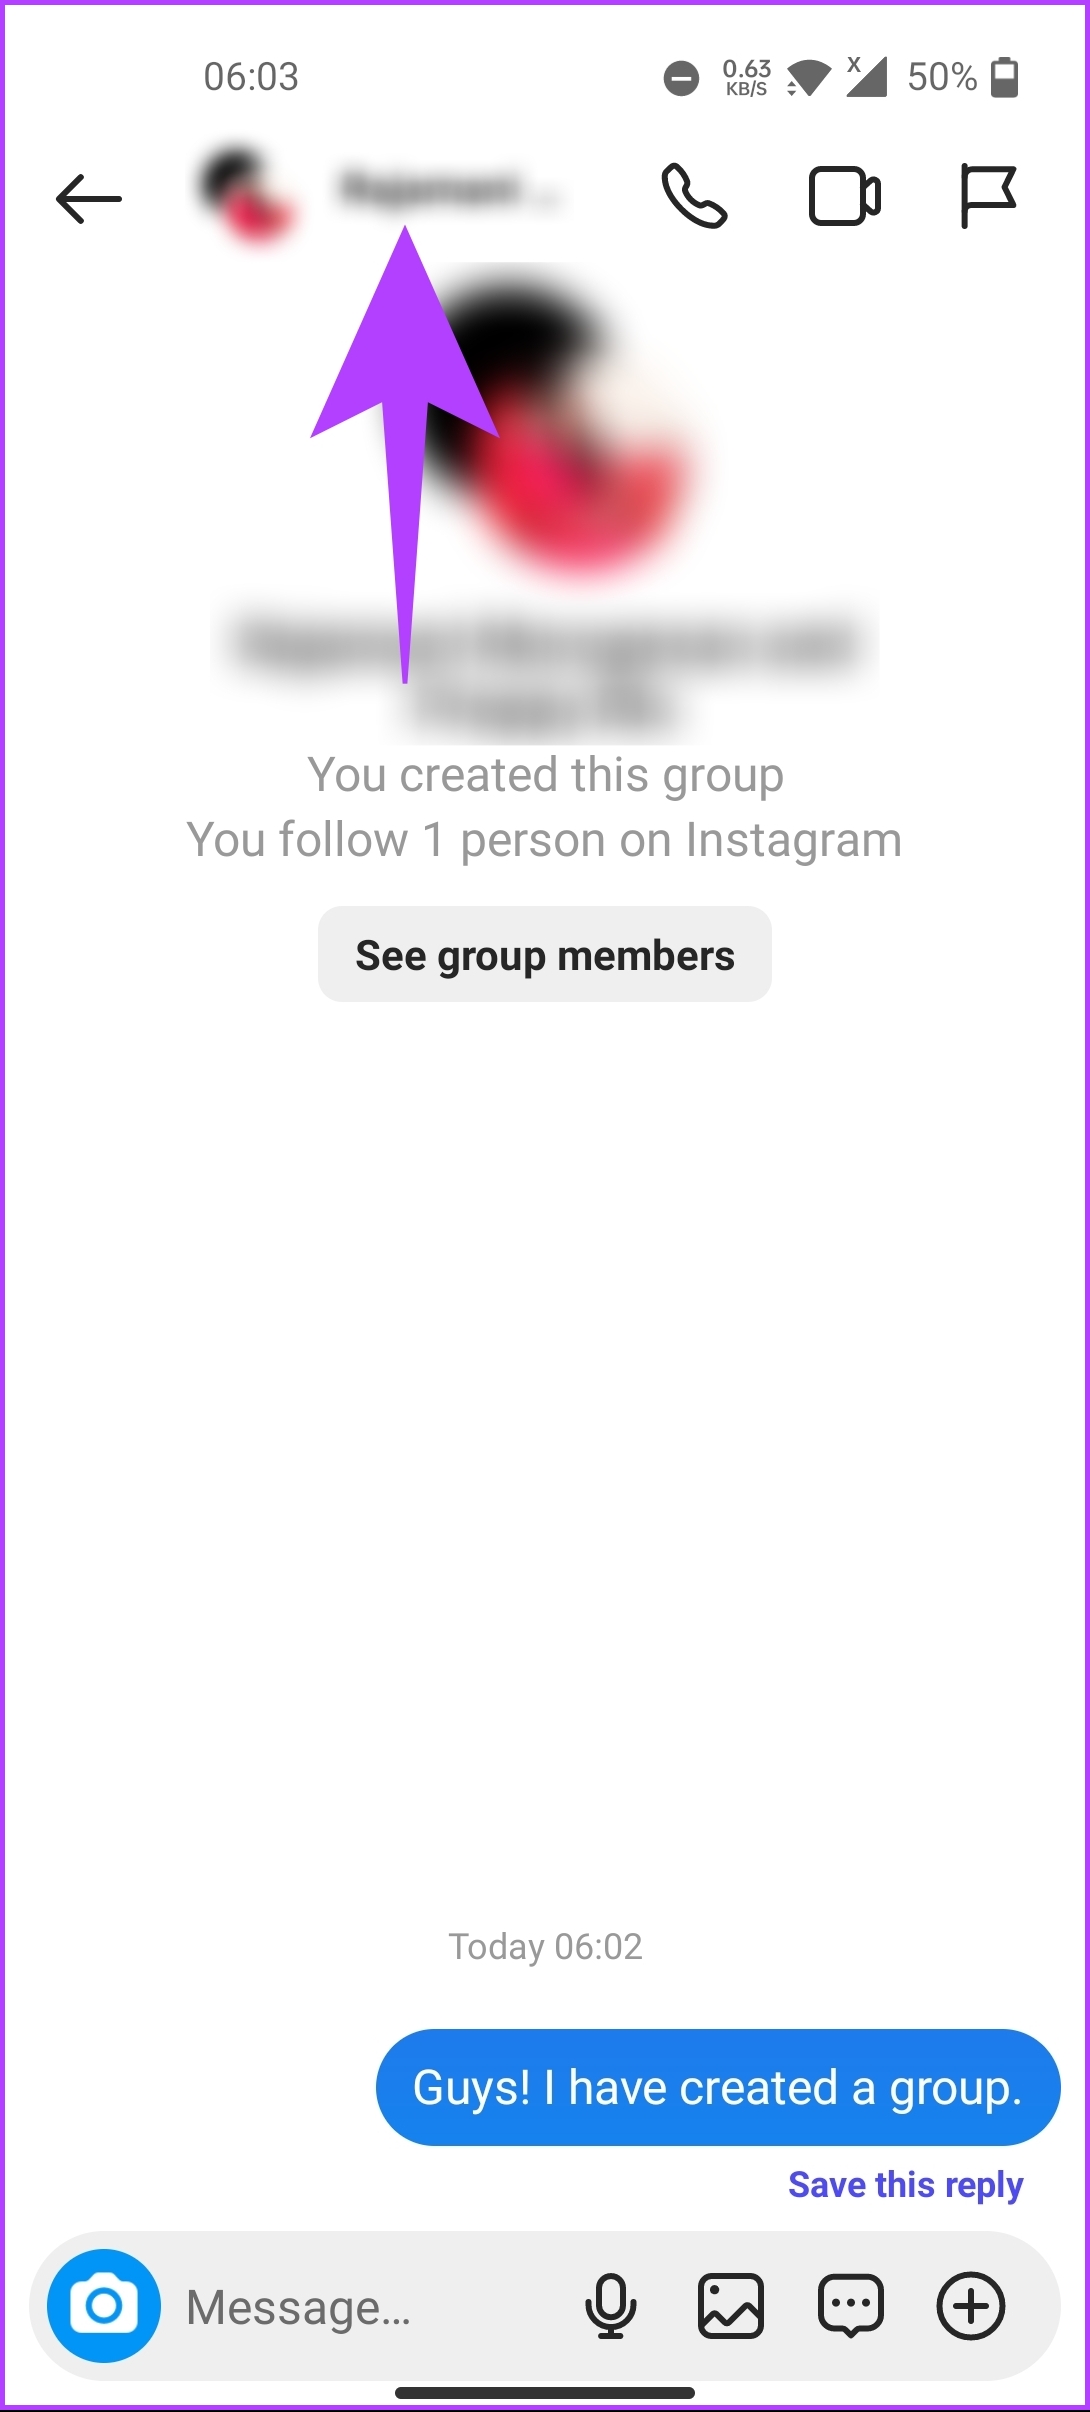 tap on the group name at the top